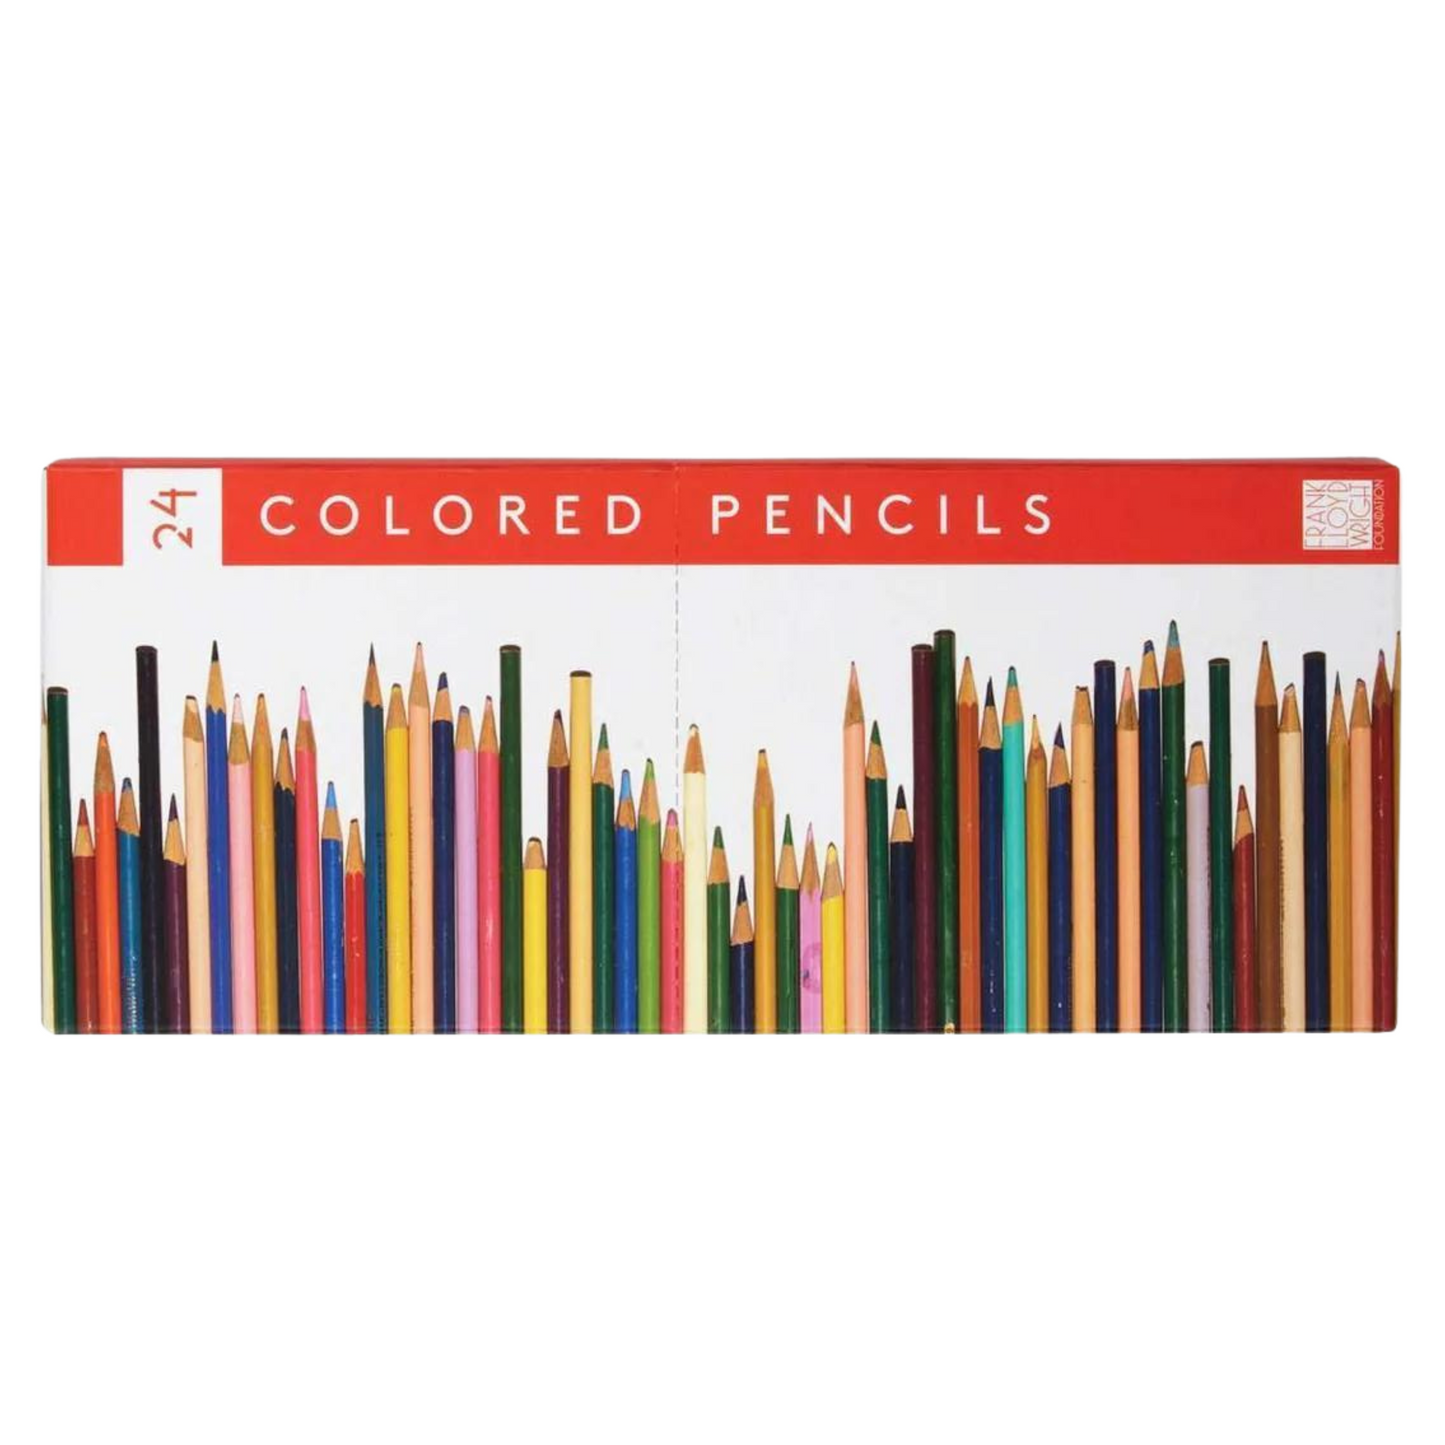 Pencil Set - Frank Lloyd Wright Colored with Sharpener